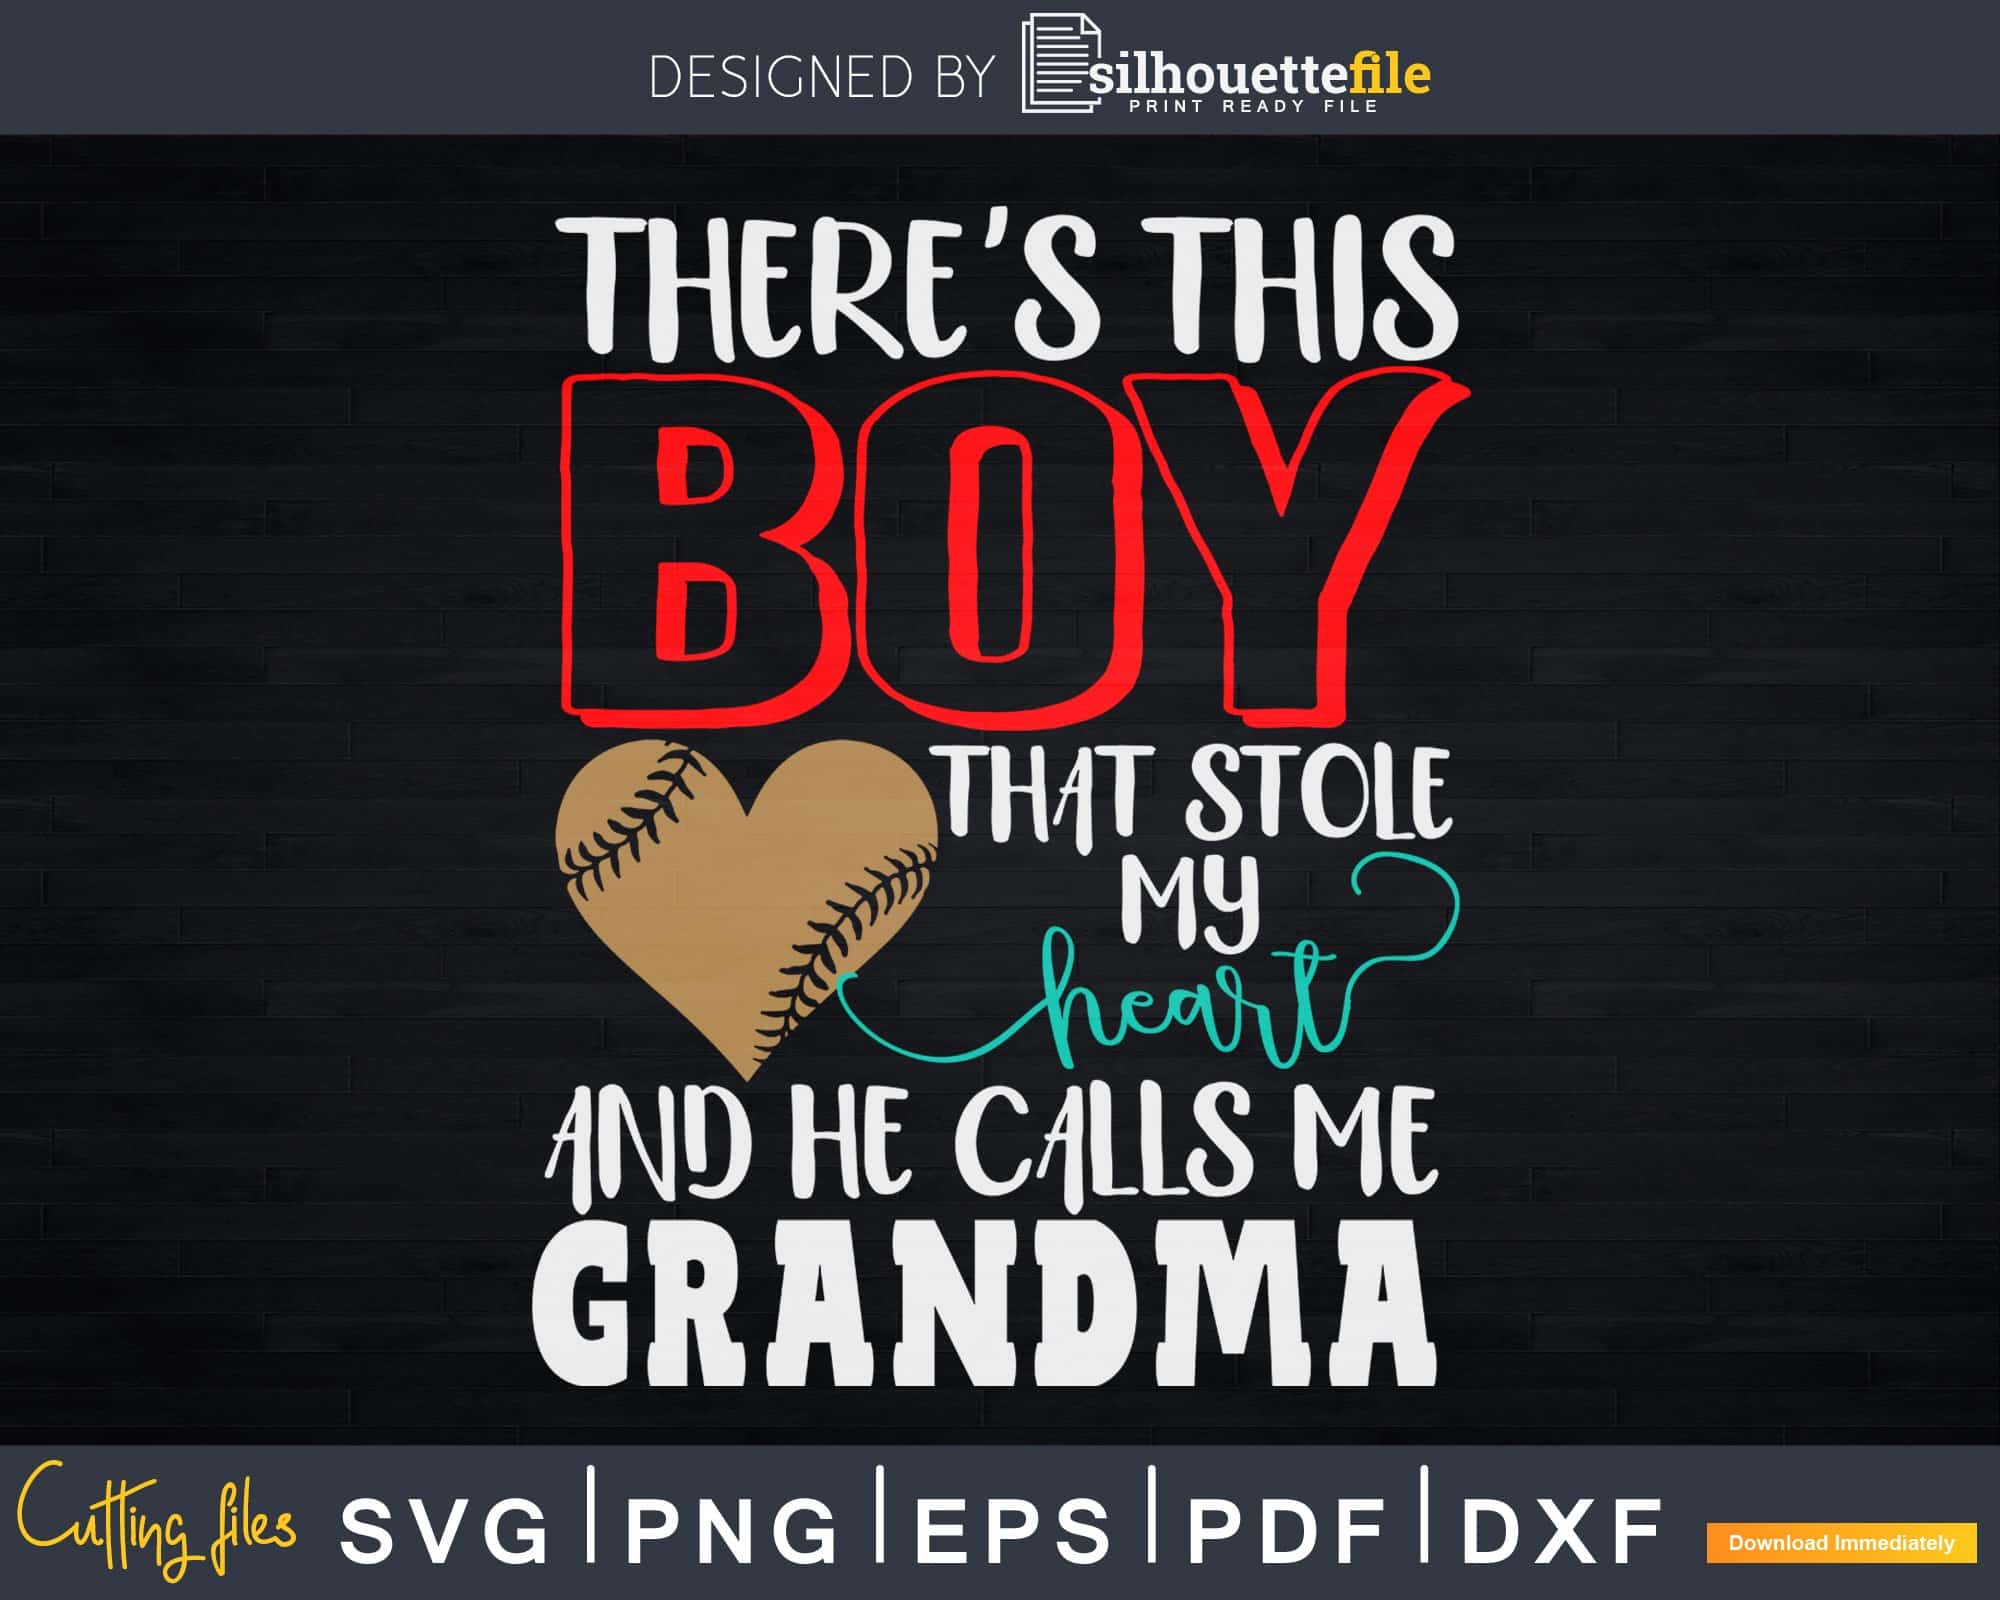 Download There S This Boy That Stole My Heart And Calls Me Grandma Svg Cut Files Silhouettefile